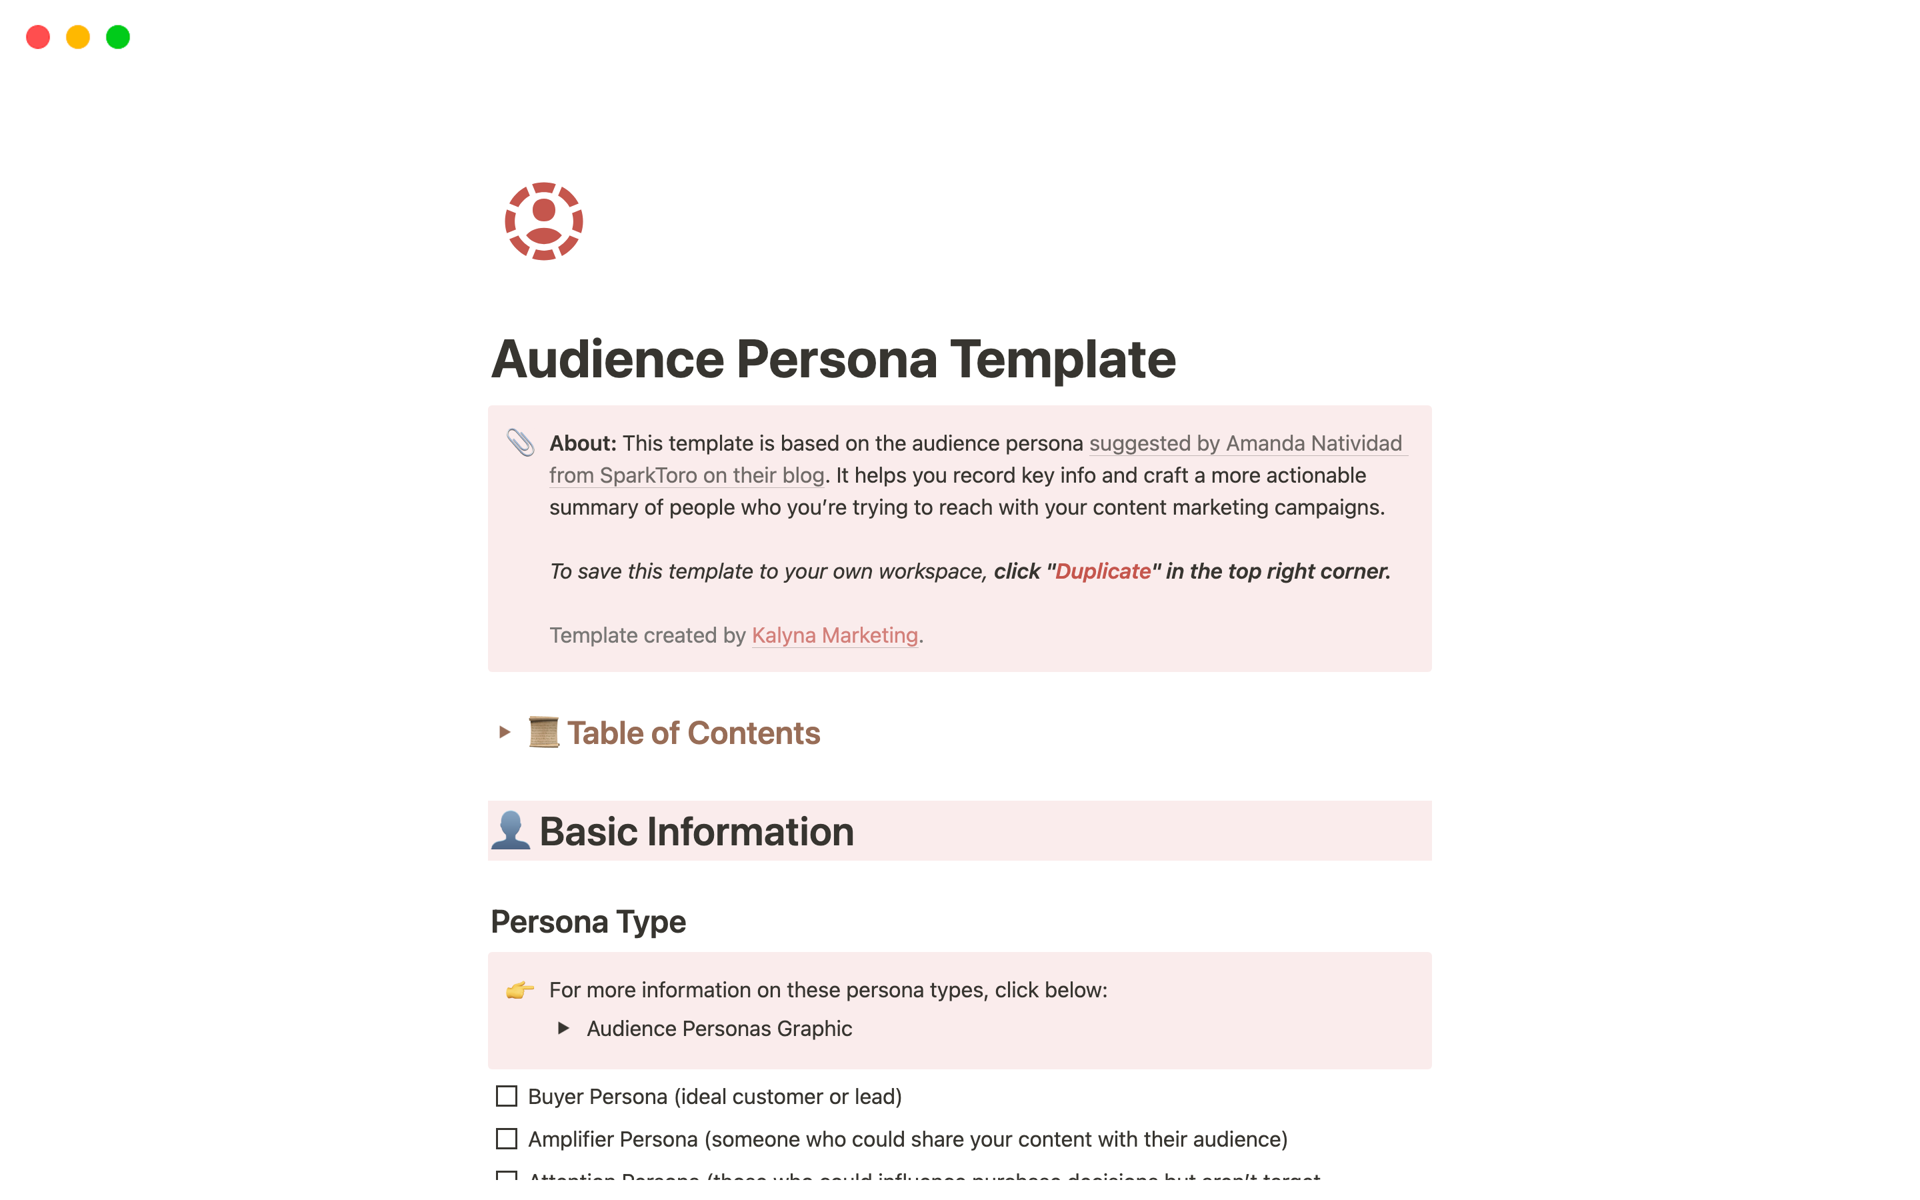 Make better personas for your content marketing campaigns.